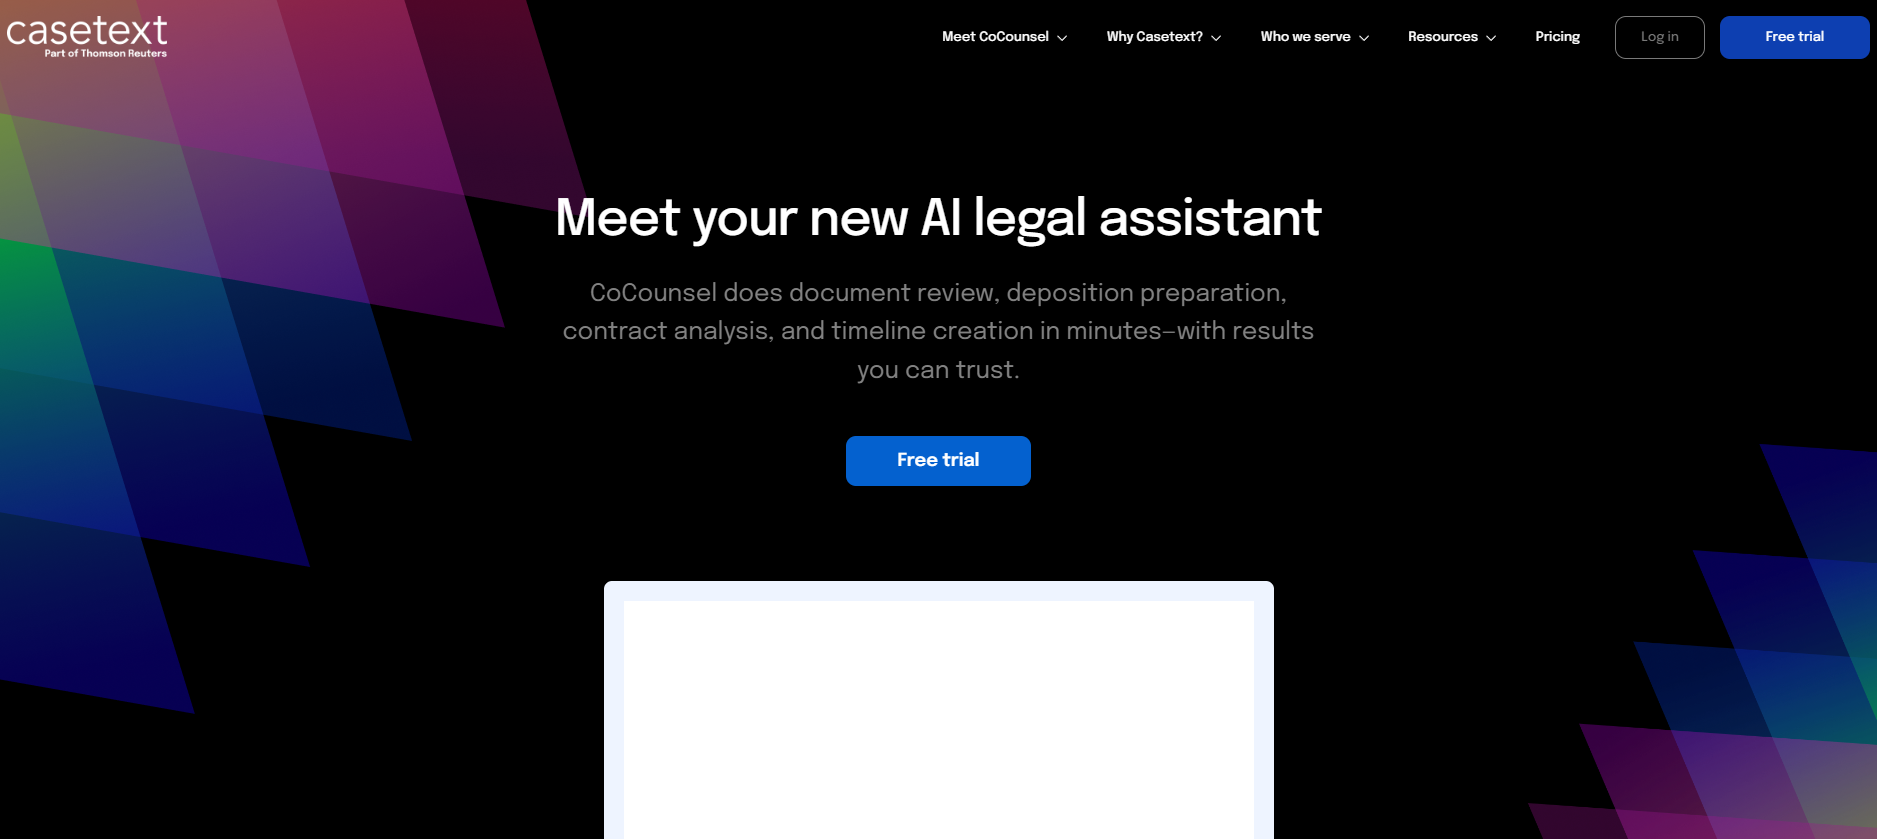 Casetext is a legal research platform that uses AI to help lawyers find relevant case law, statutes, and regulations quickly and efficiently